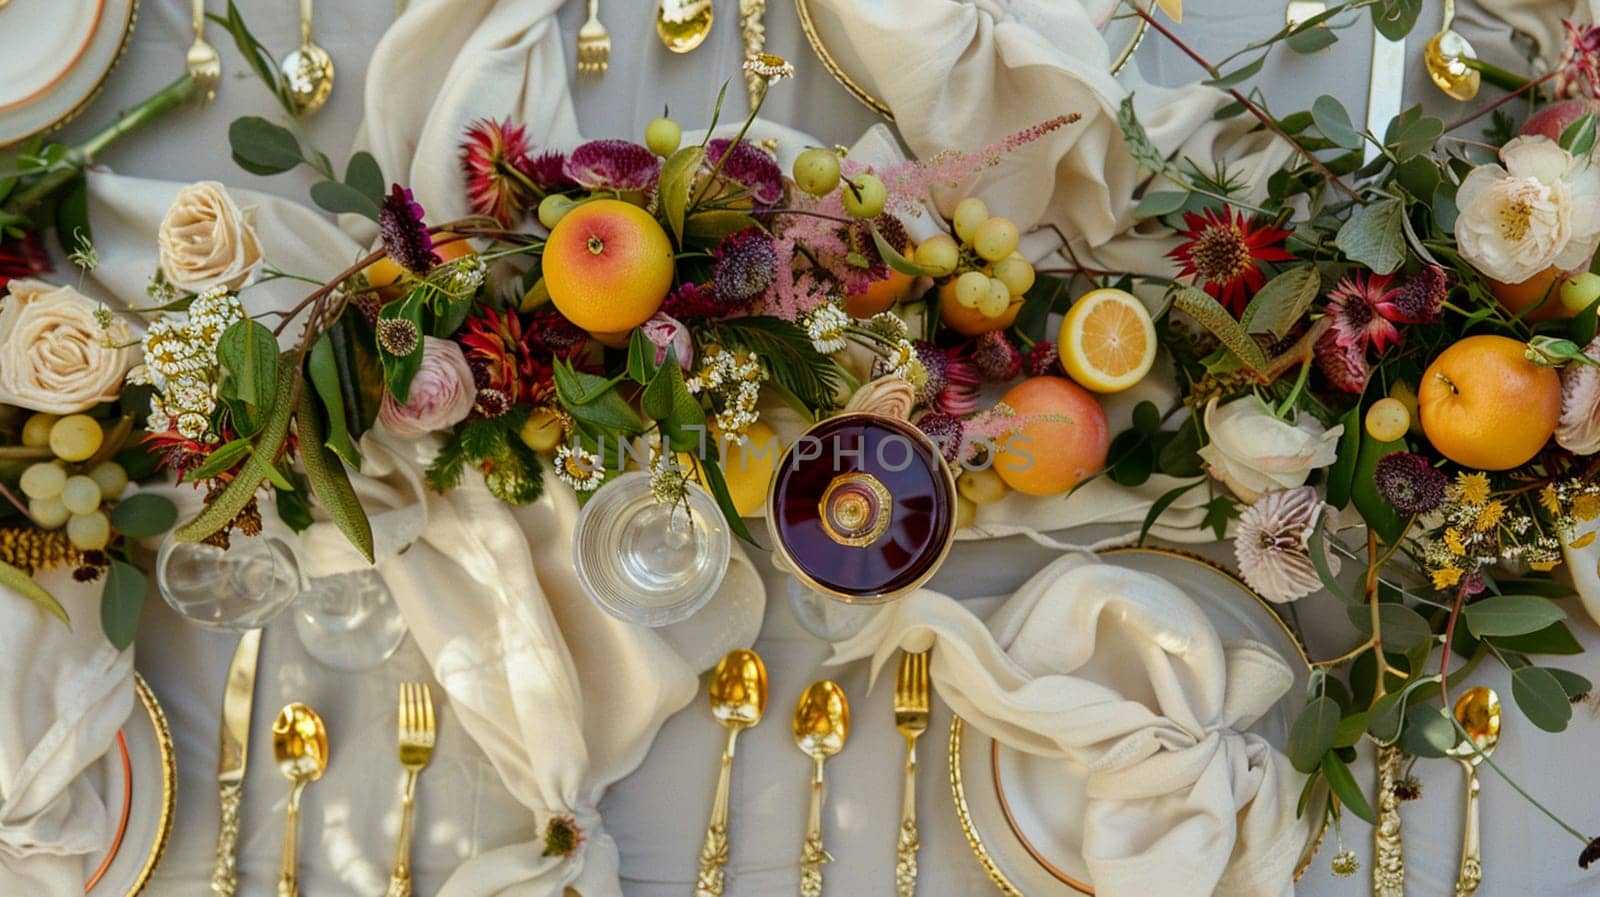 Table decor with fruits in citrus garden, holiday tablescape and dinner table setting, formal event decoration for wedding, family celebration, English country and home styling